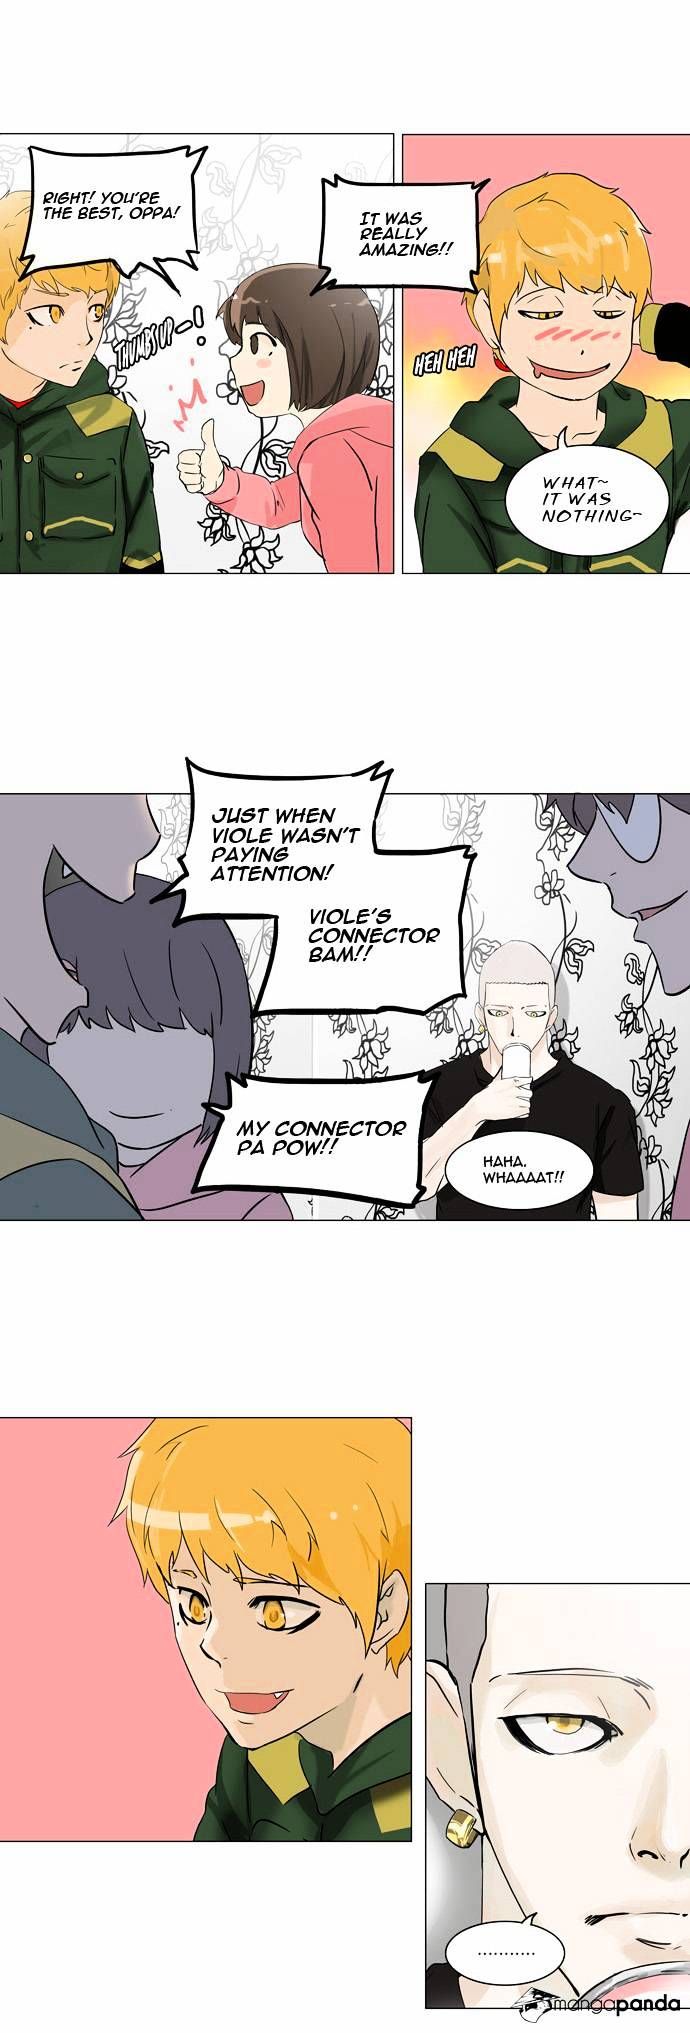 Tower of God Chapter 102 page 9